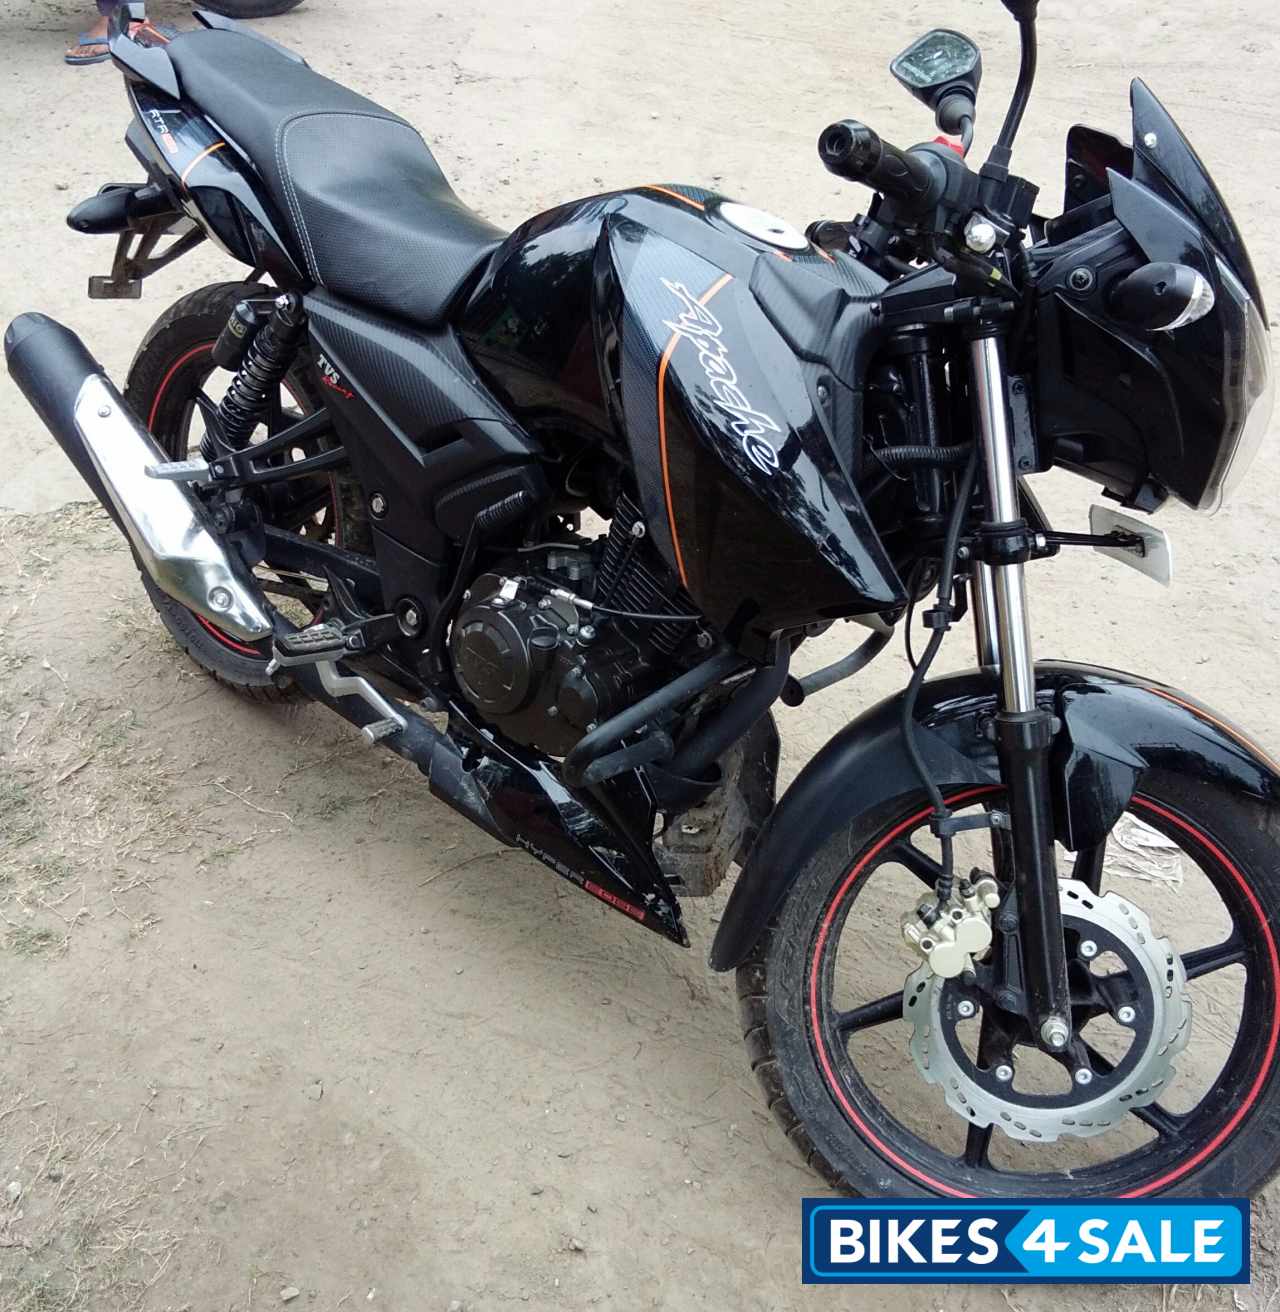 Used 2016 Model Tvs Apache Rtr 160 For Sale In Ambala Id 137034